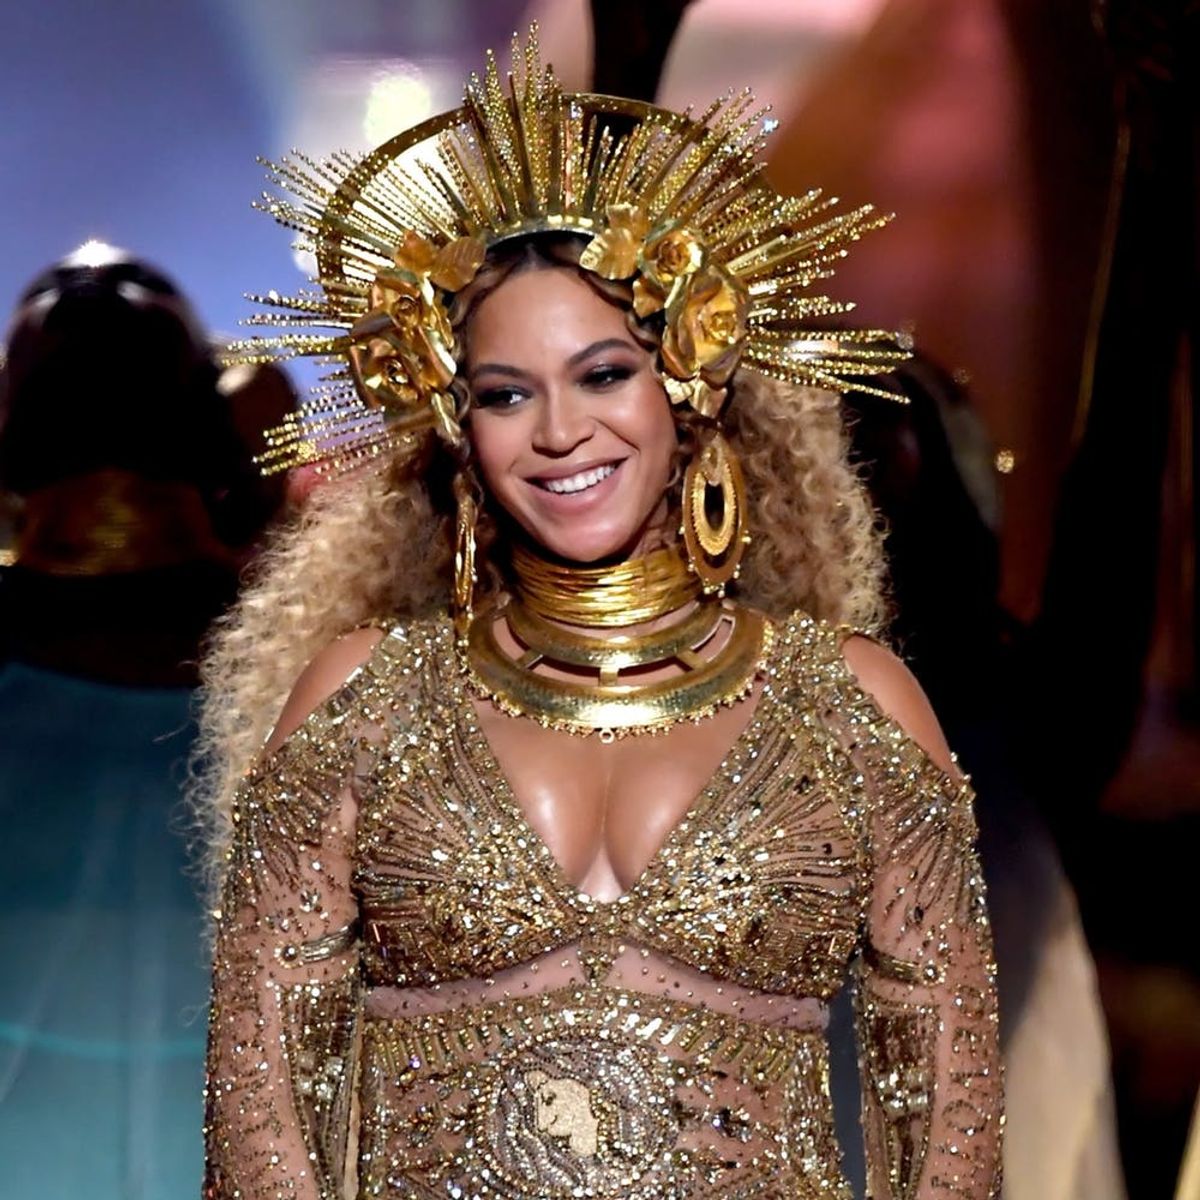 Everything You Need to Know About This Bizarre #WhoBitBeyoncé Mystery